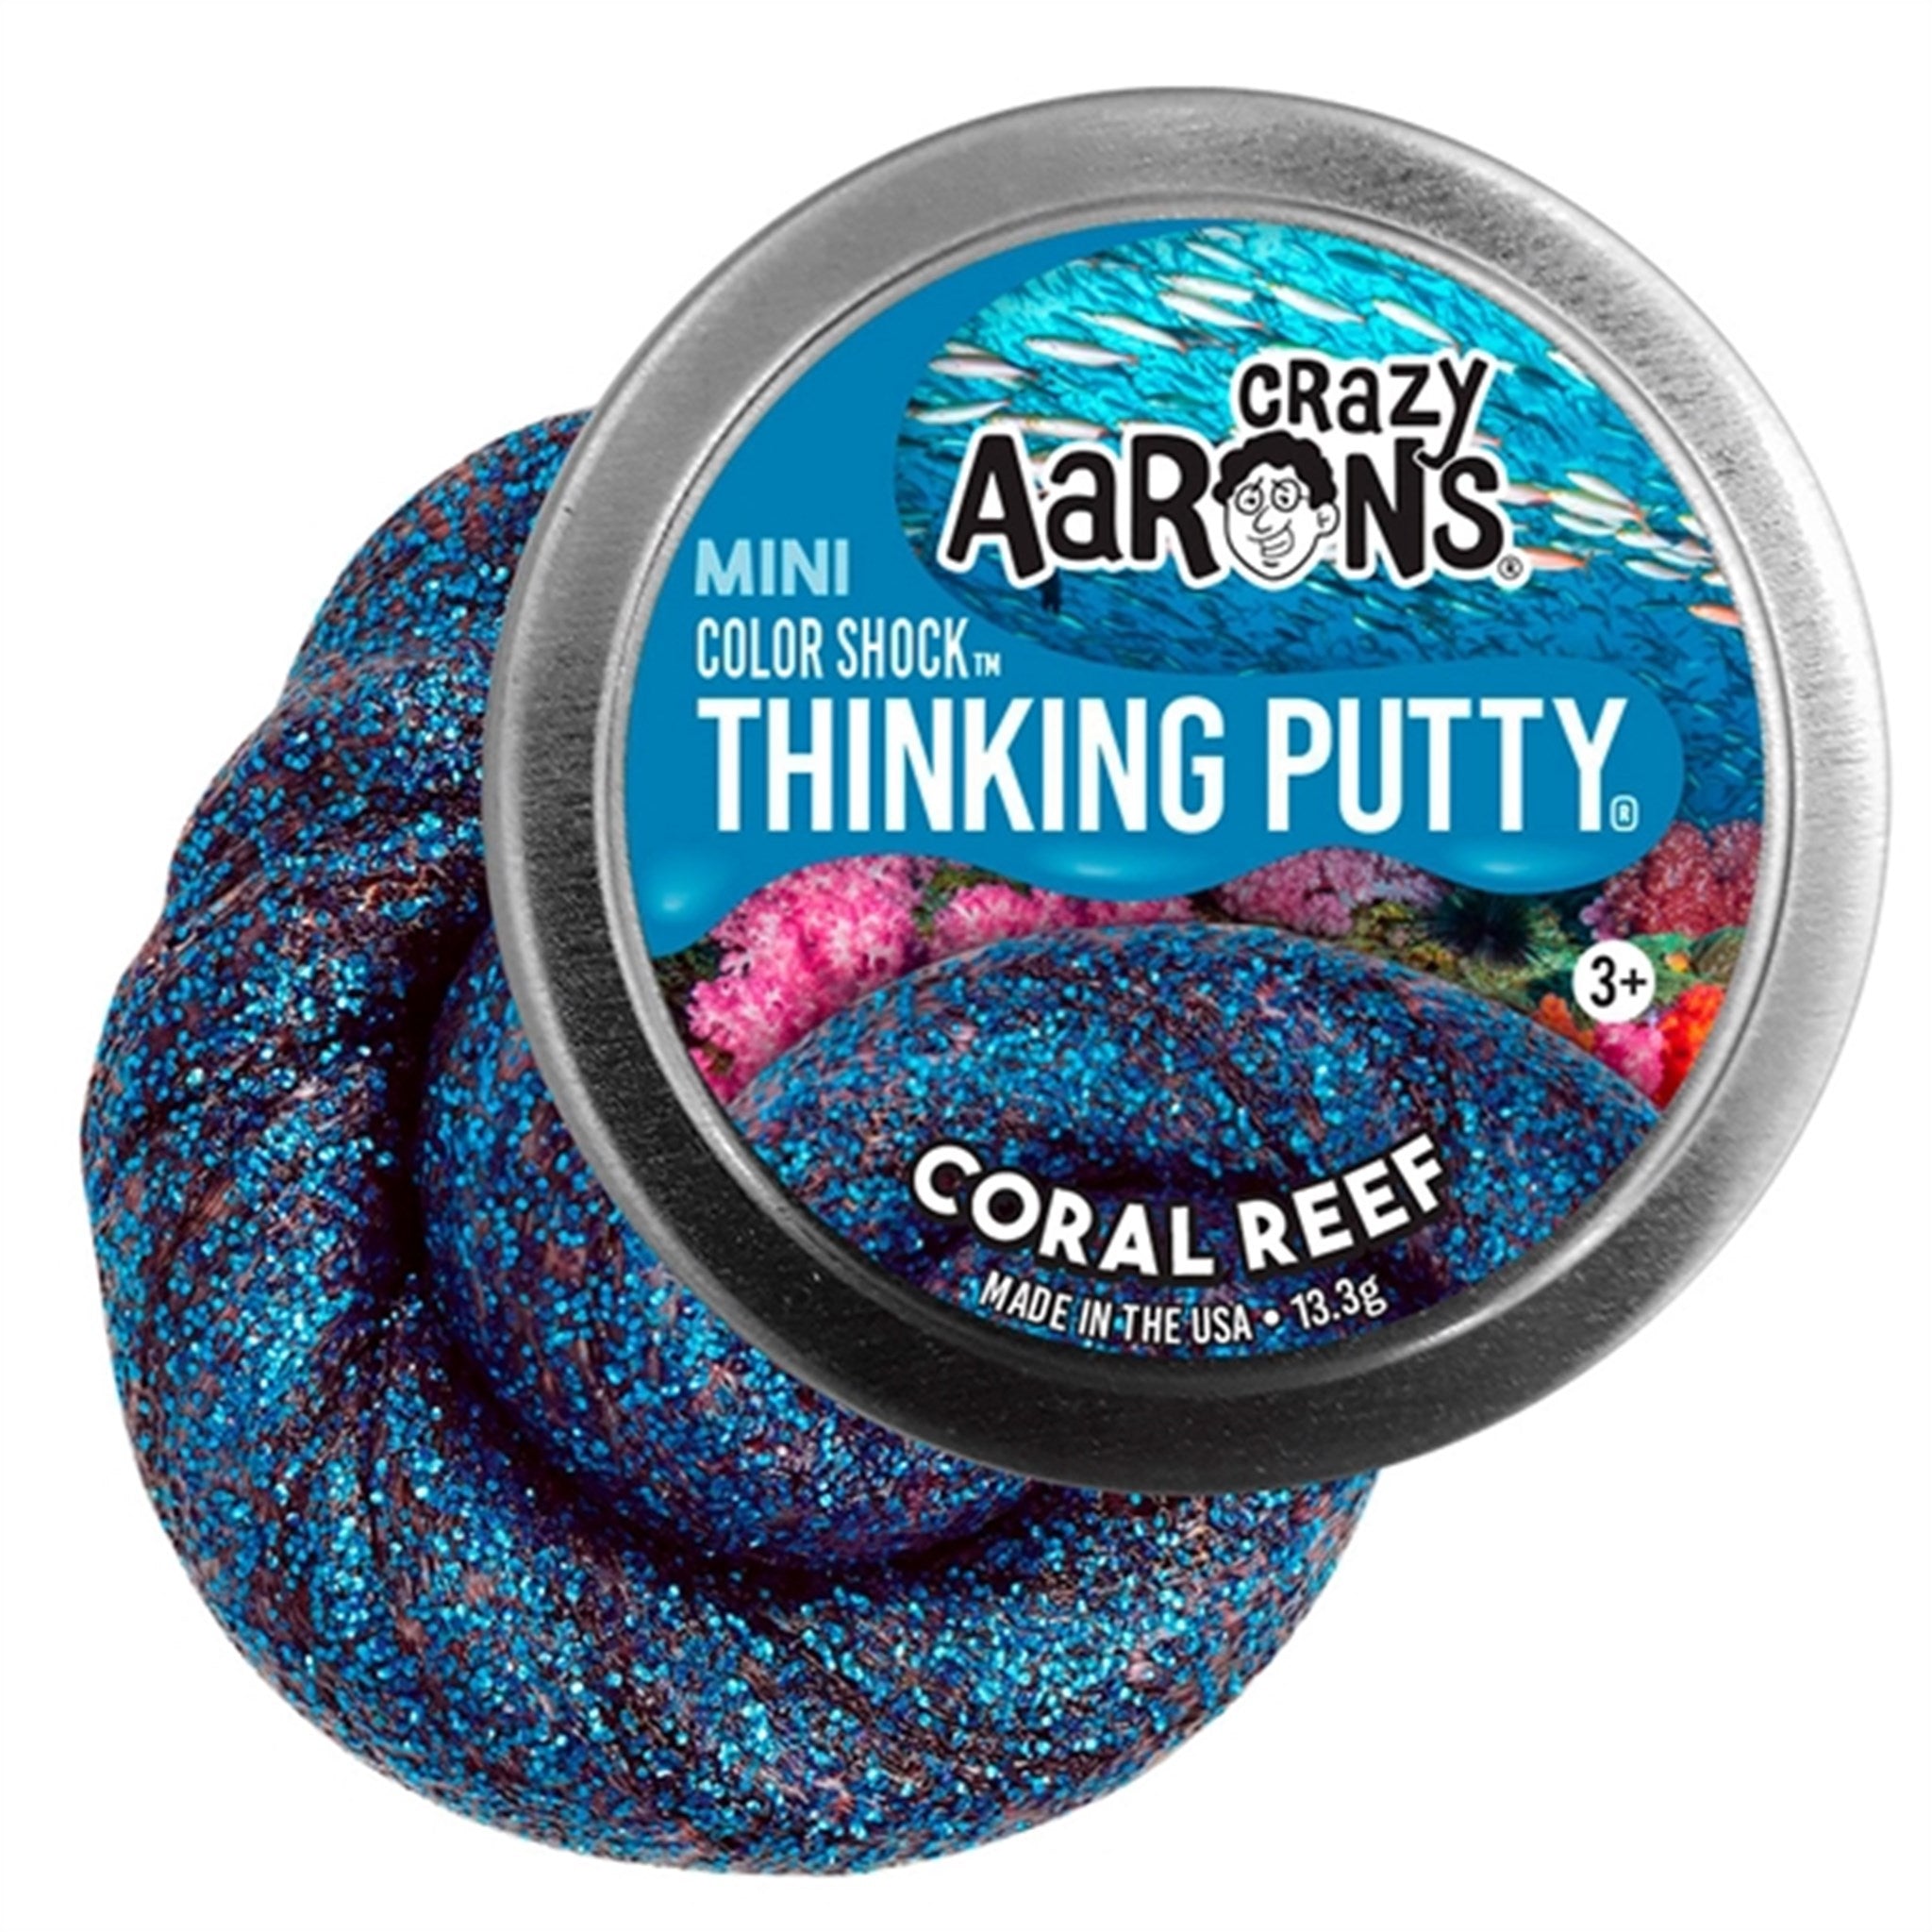 Crazy Aaron's® Slim - Thinking Putty Mini Tins - Coral Reef